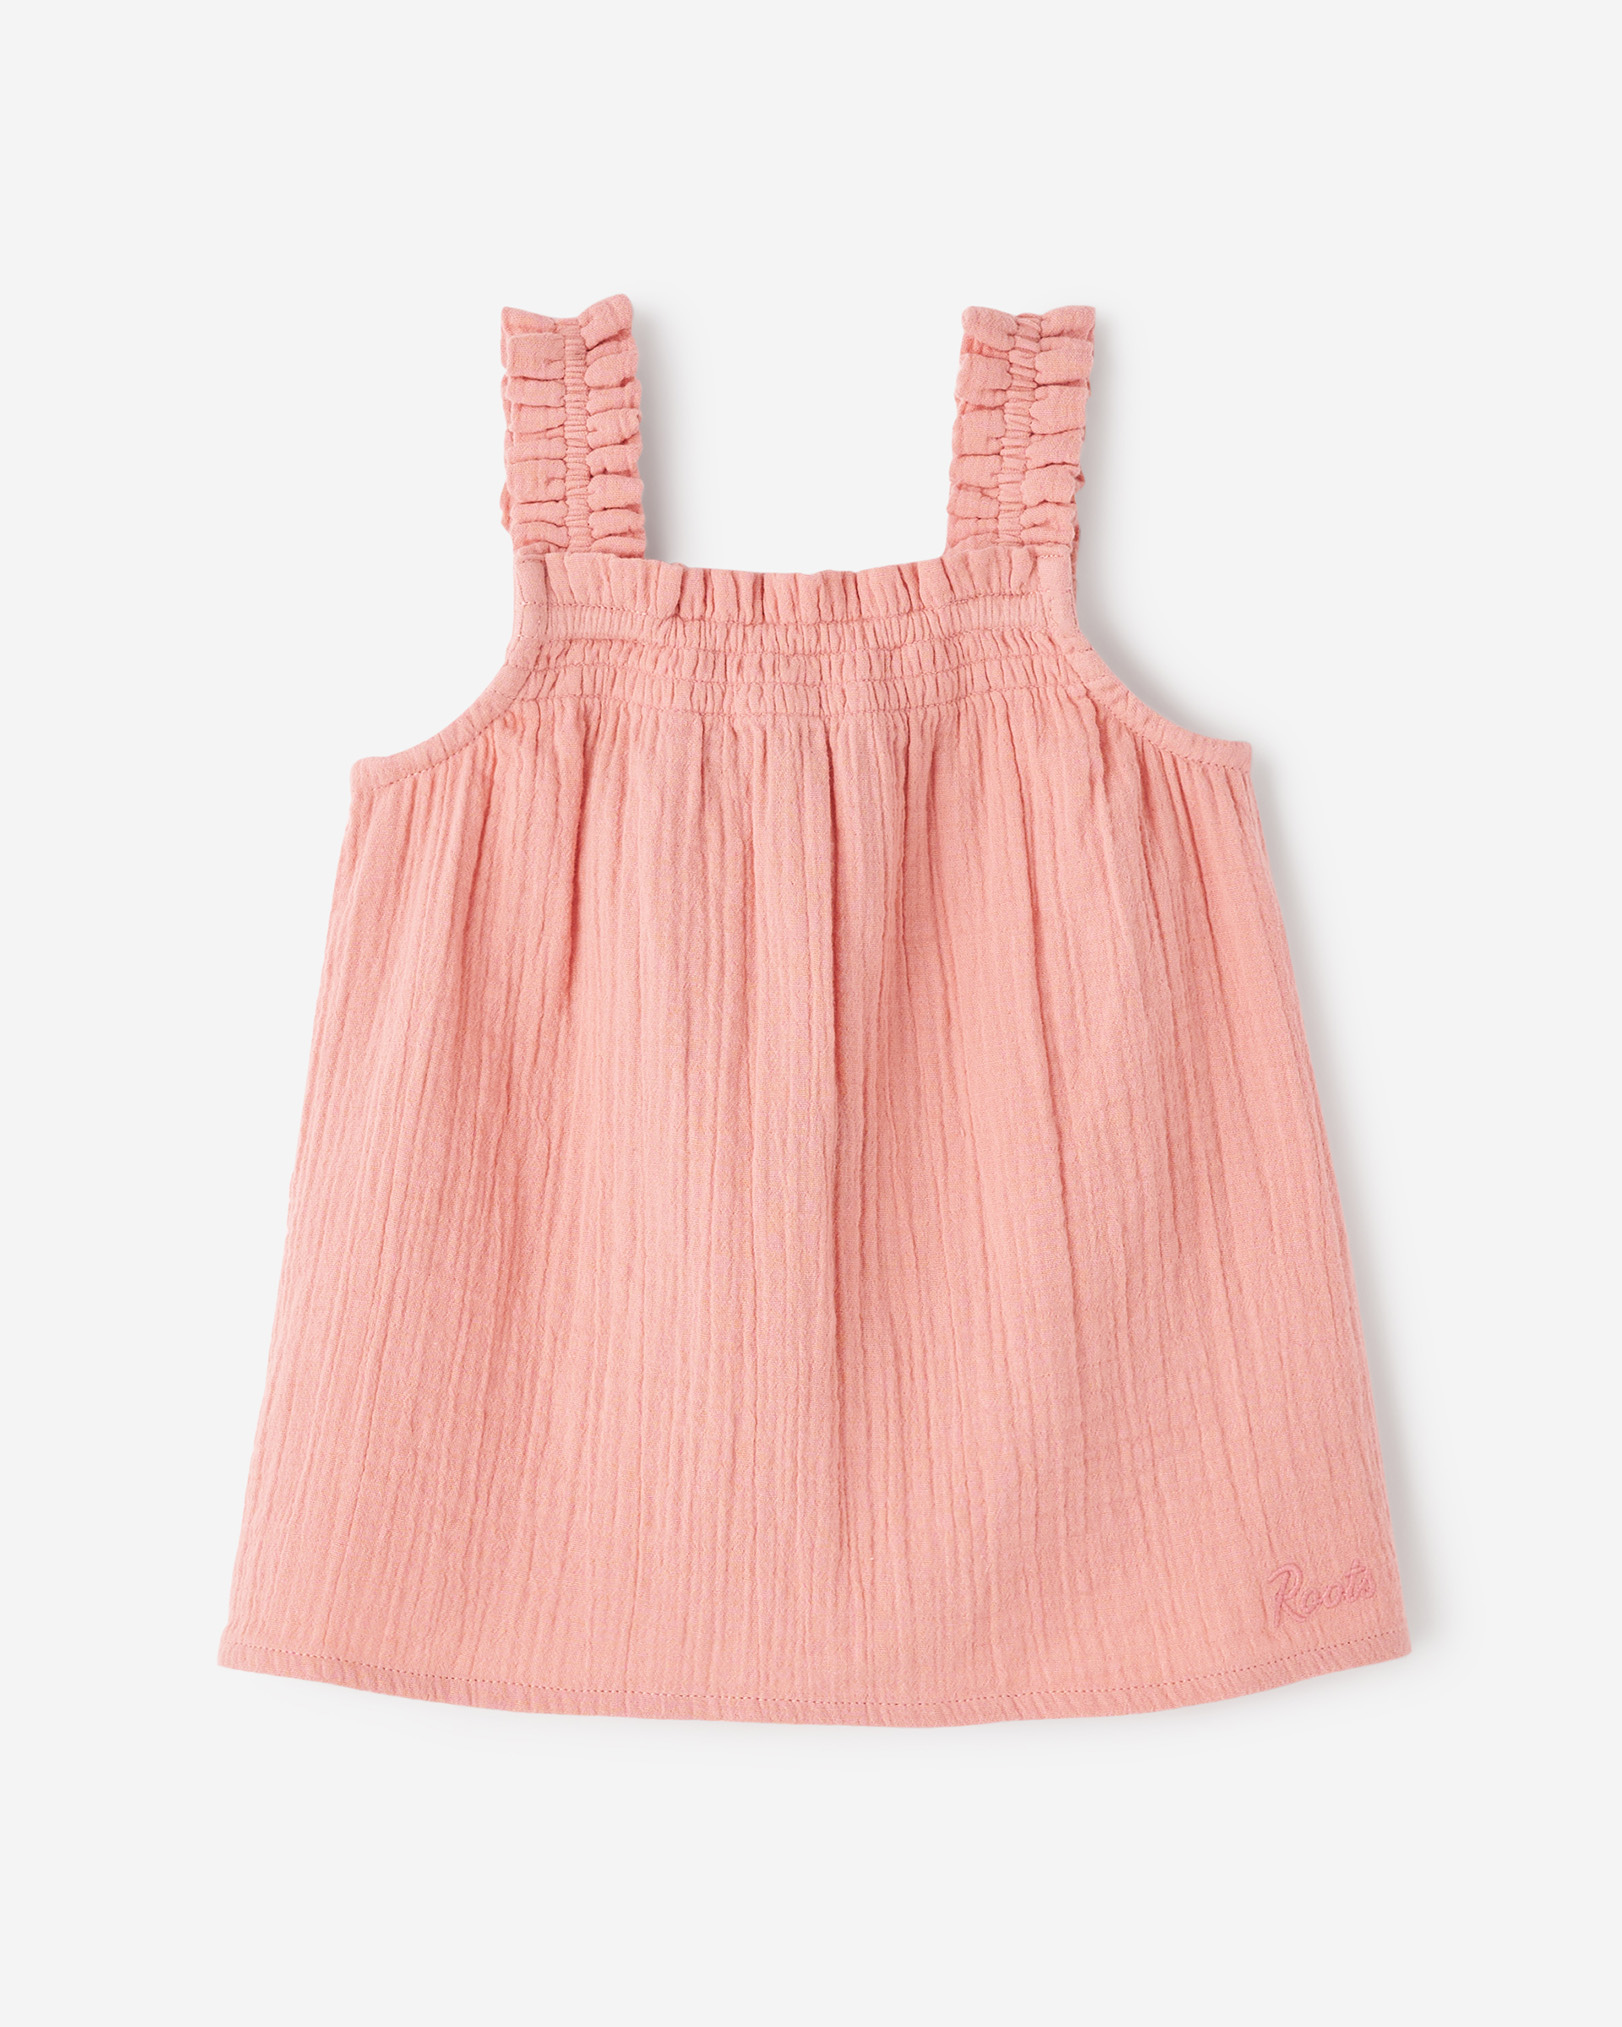 Roots Baby Crinkle Smocked Dress in Mauveglow